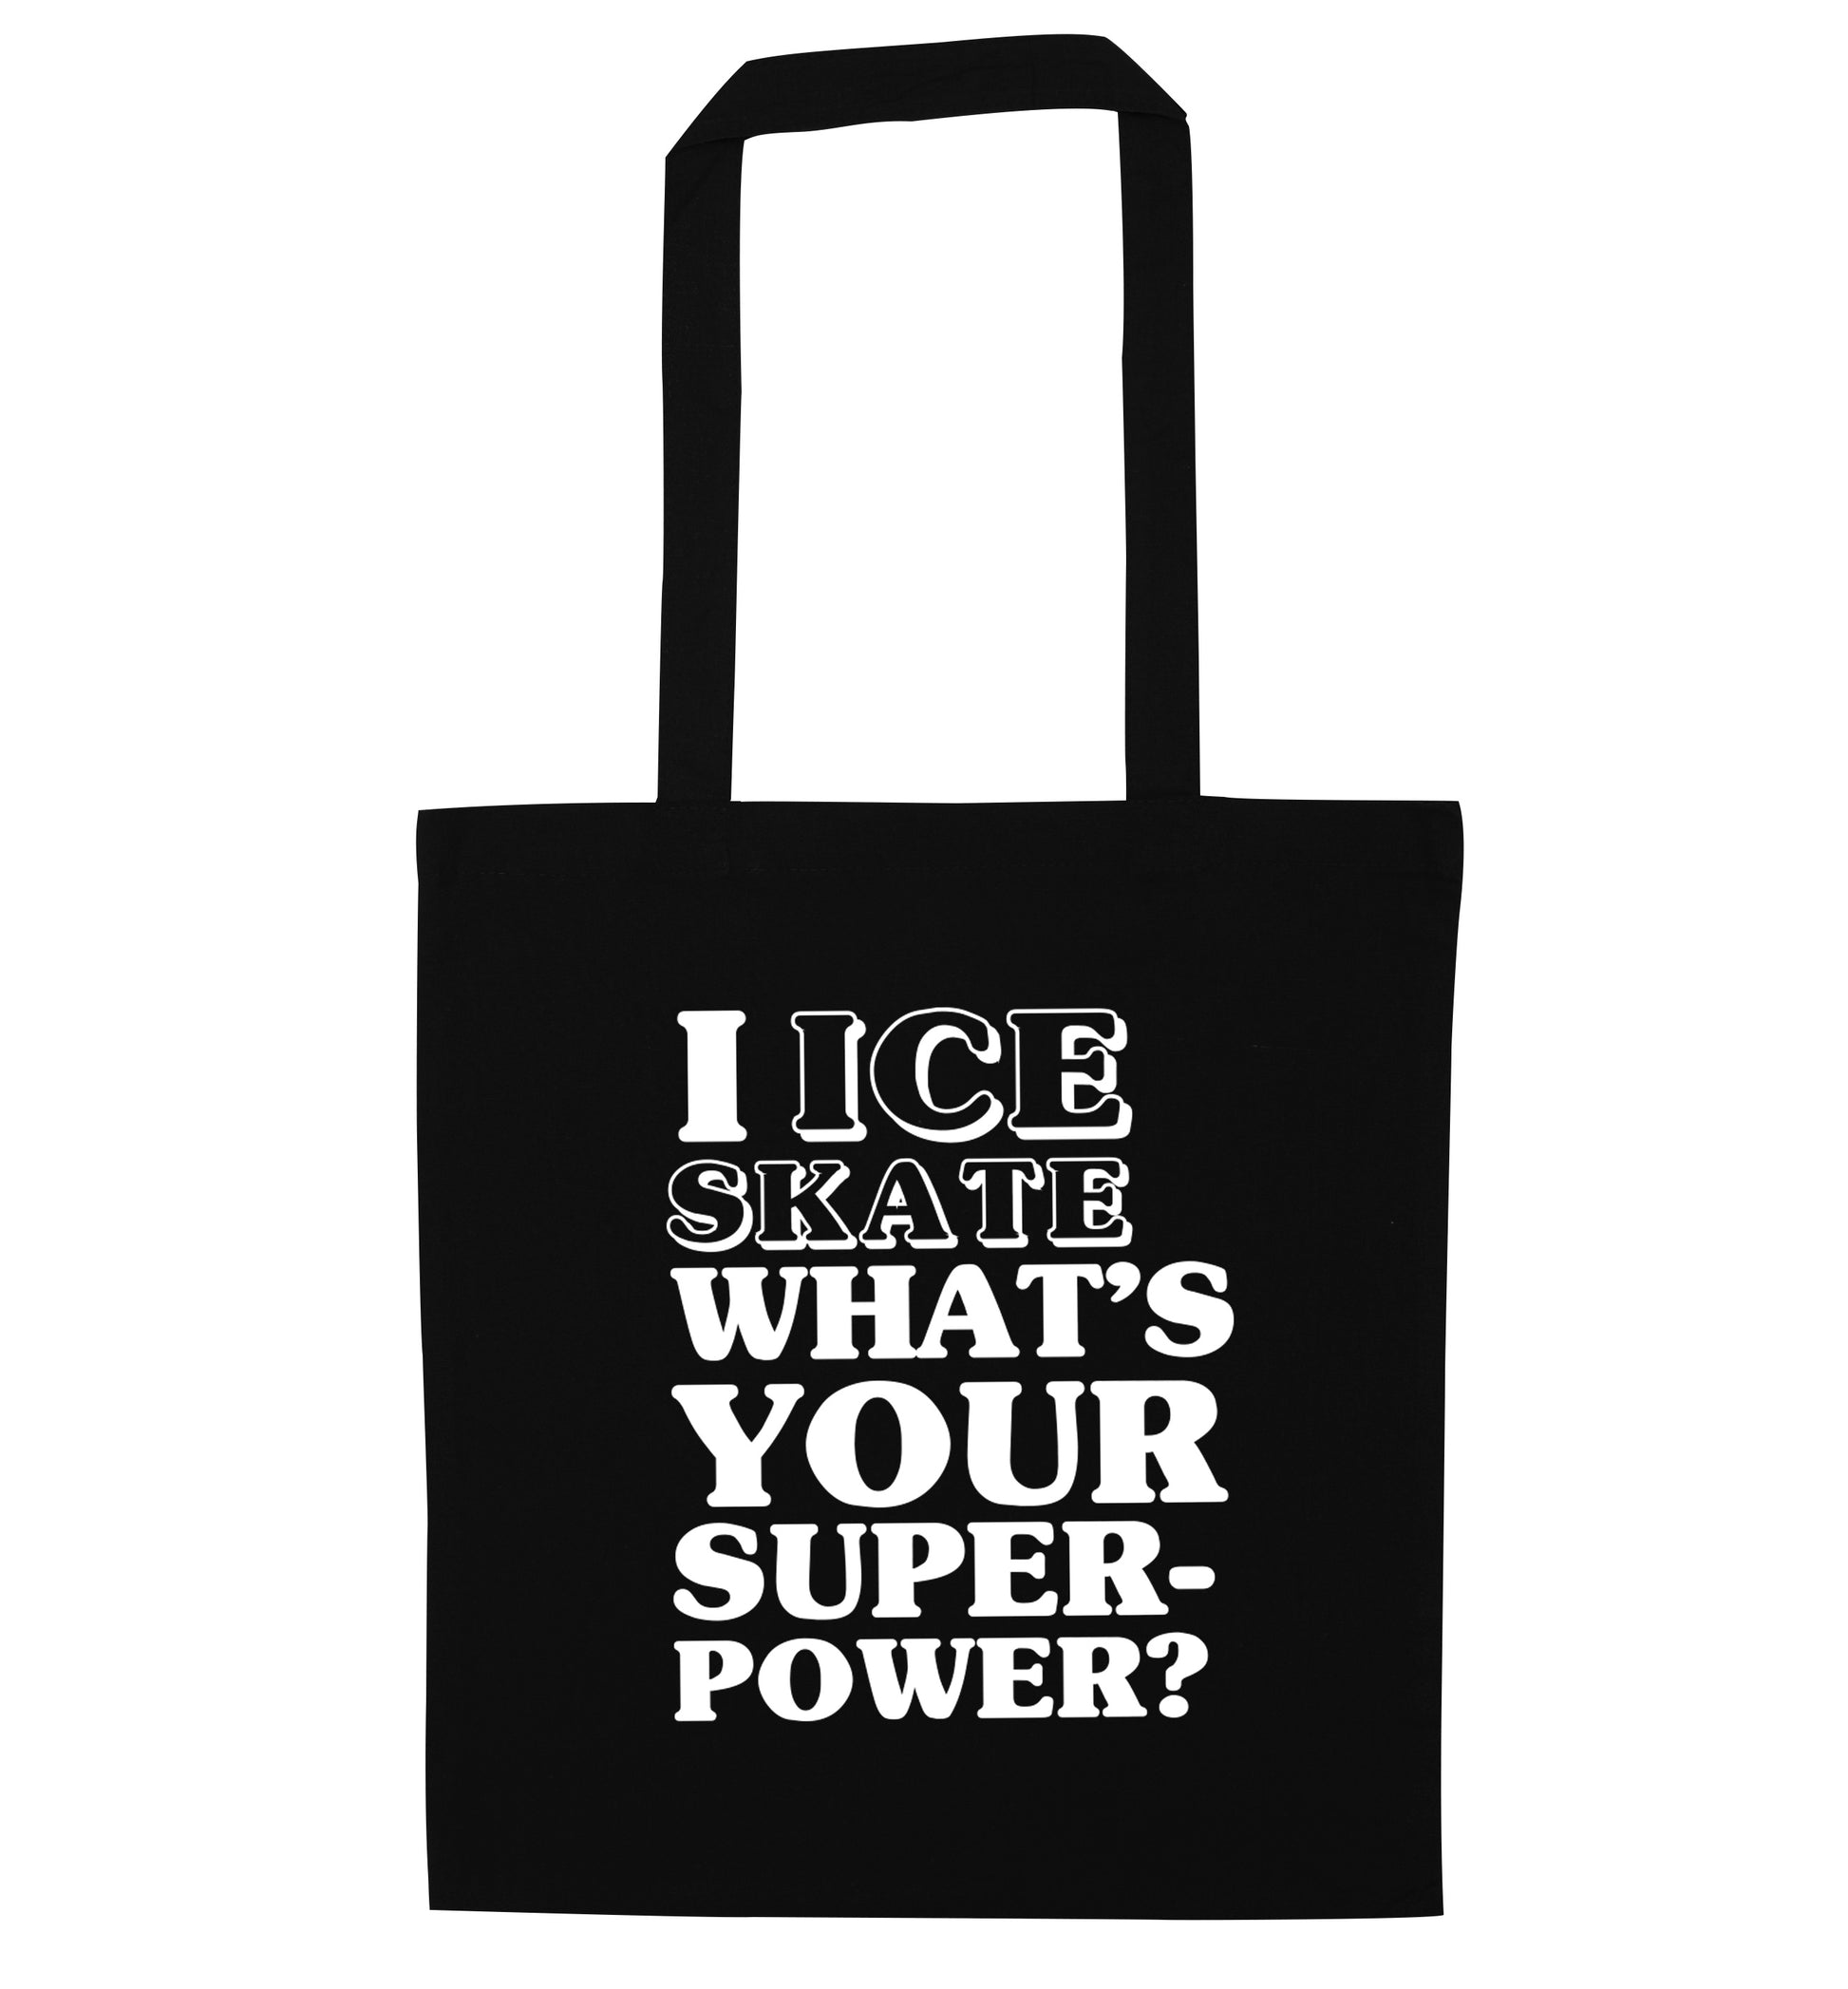 I ice skate what's your superpower? black tote bag